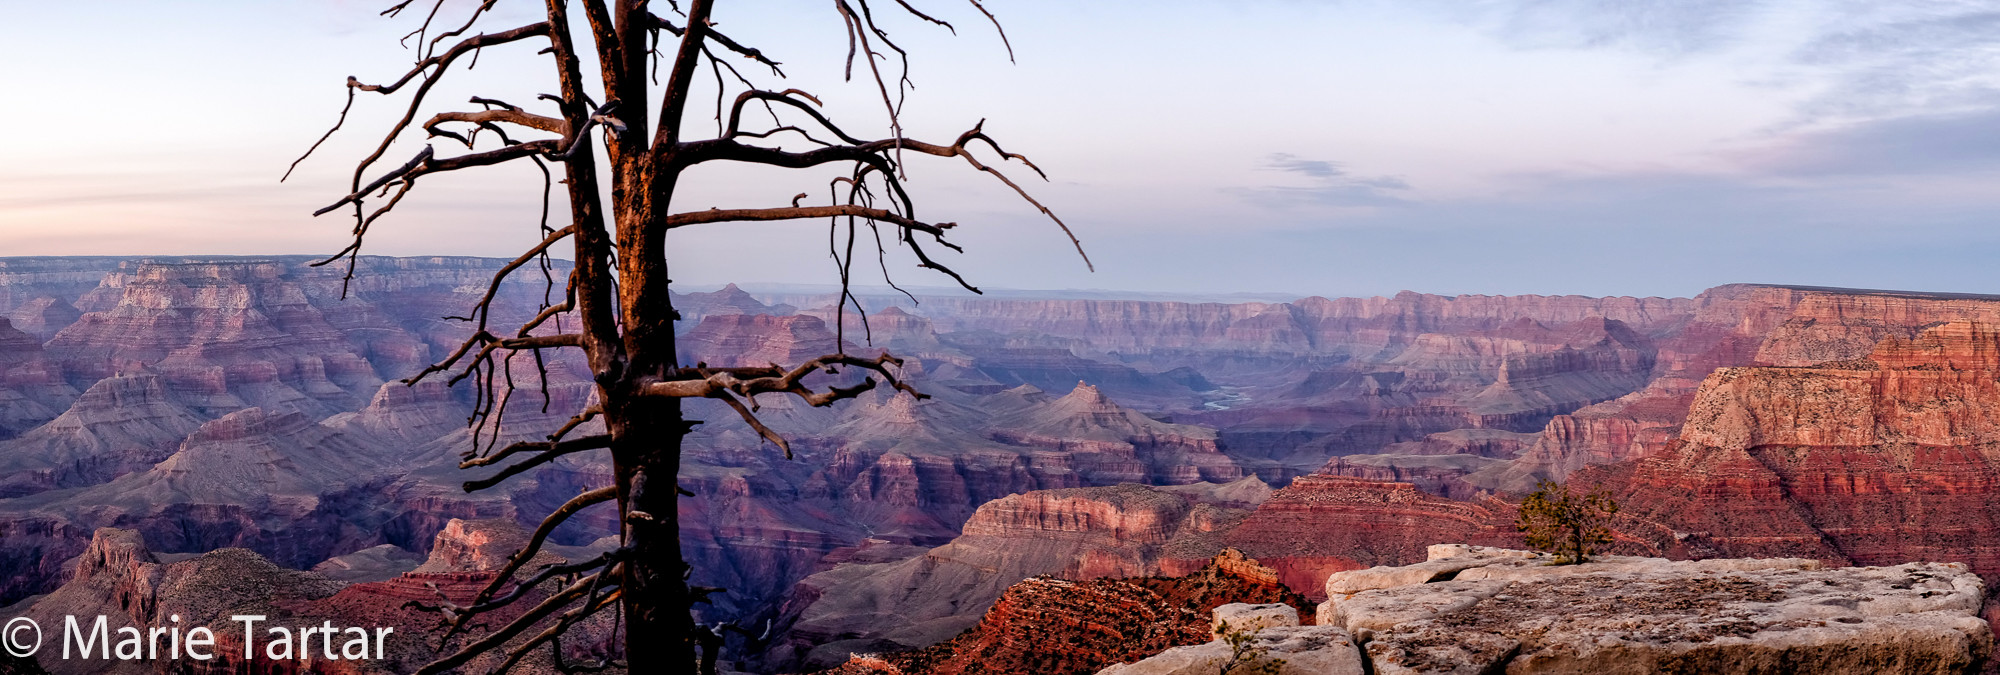 Only a panoramic view seems to capture the expanse of the Grand Canyon